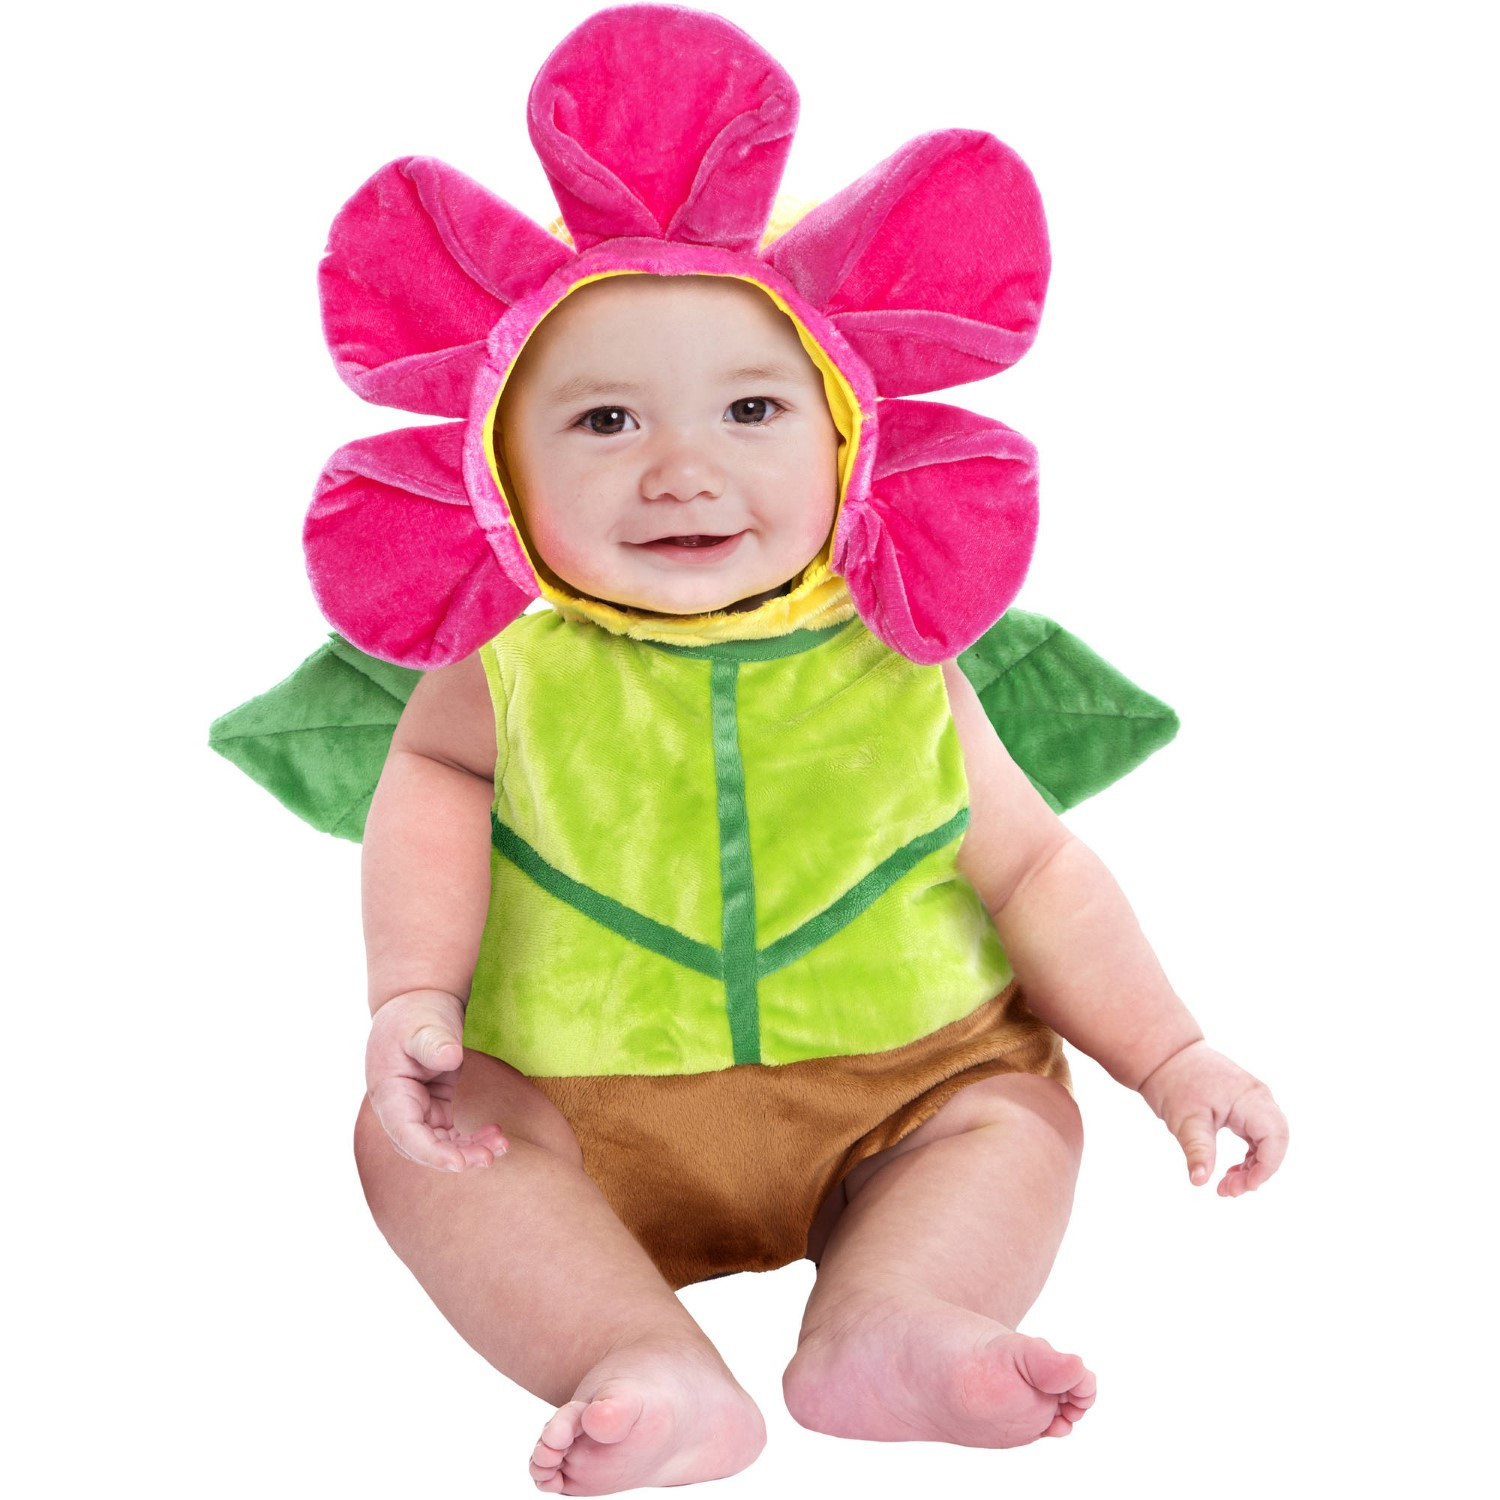 Baby Flower Halloween Costumes
 Flower Pot Bubble Infant Halloween Dress Up Role Play